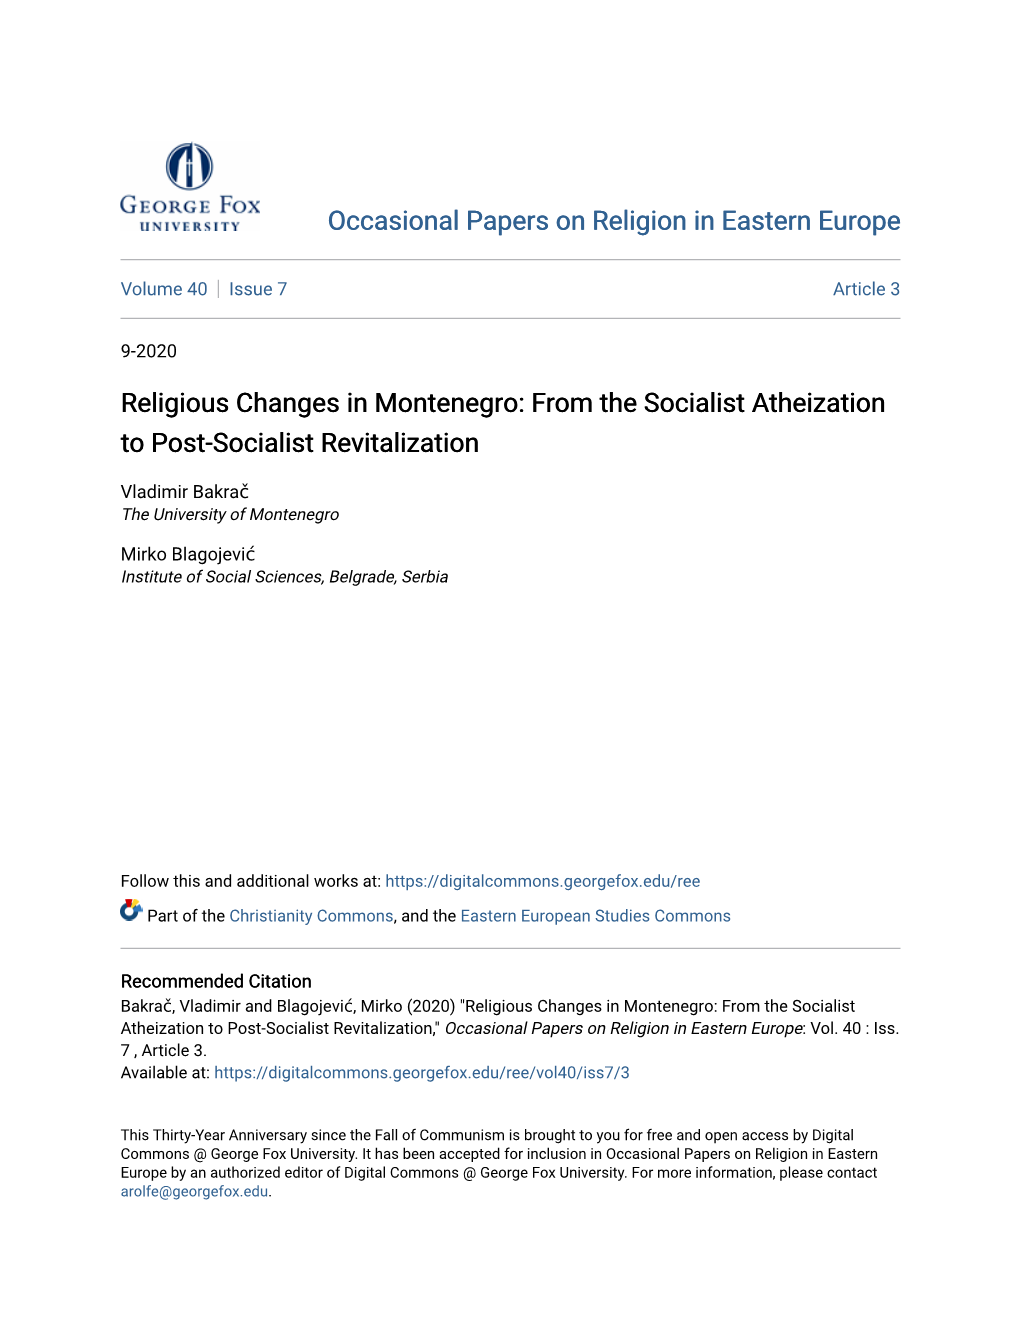 Religious Changes in Montenegro: from the Socialist Atheization to Post-Socialist Revitalization